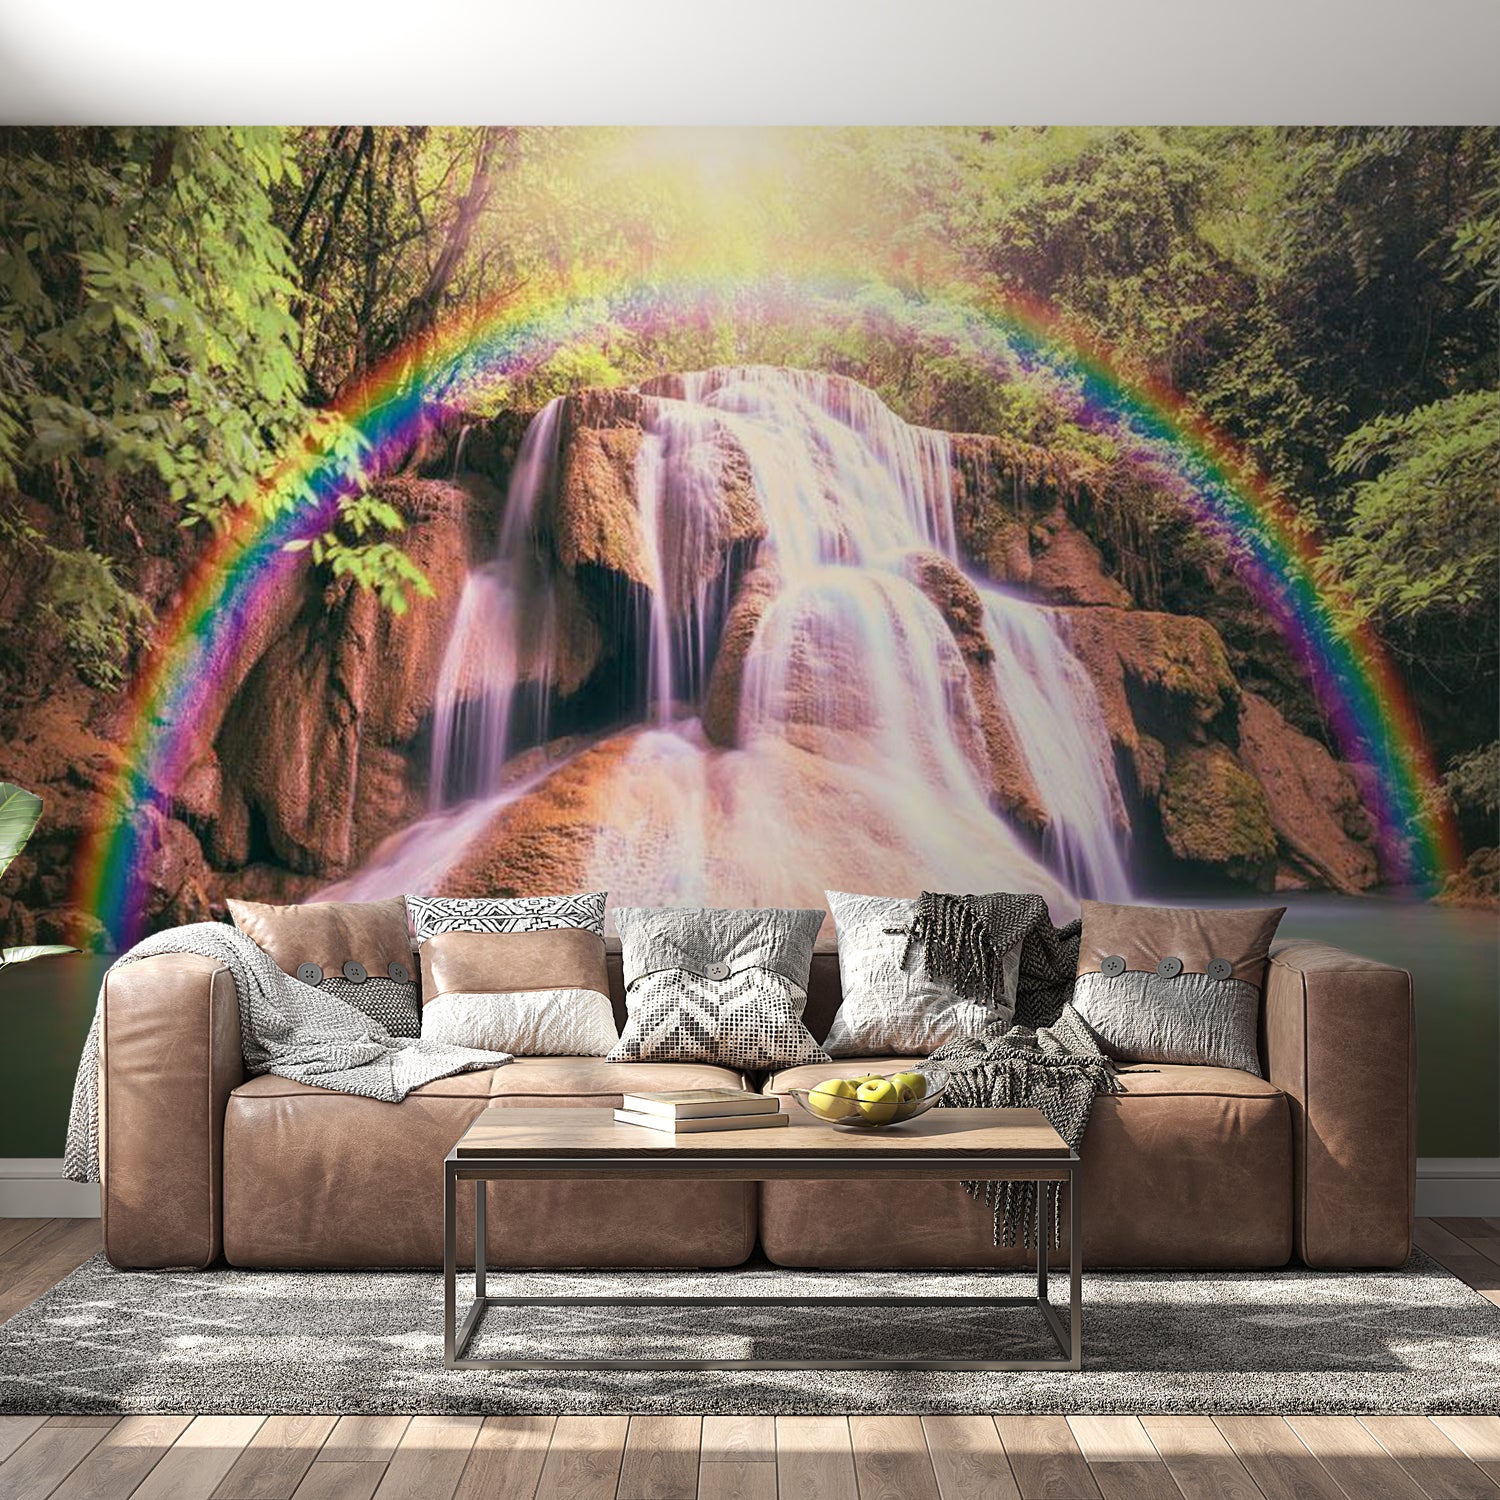 Peel & Stick Nature Wall Mural - Magical Waterfall - Removable Wall Decals